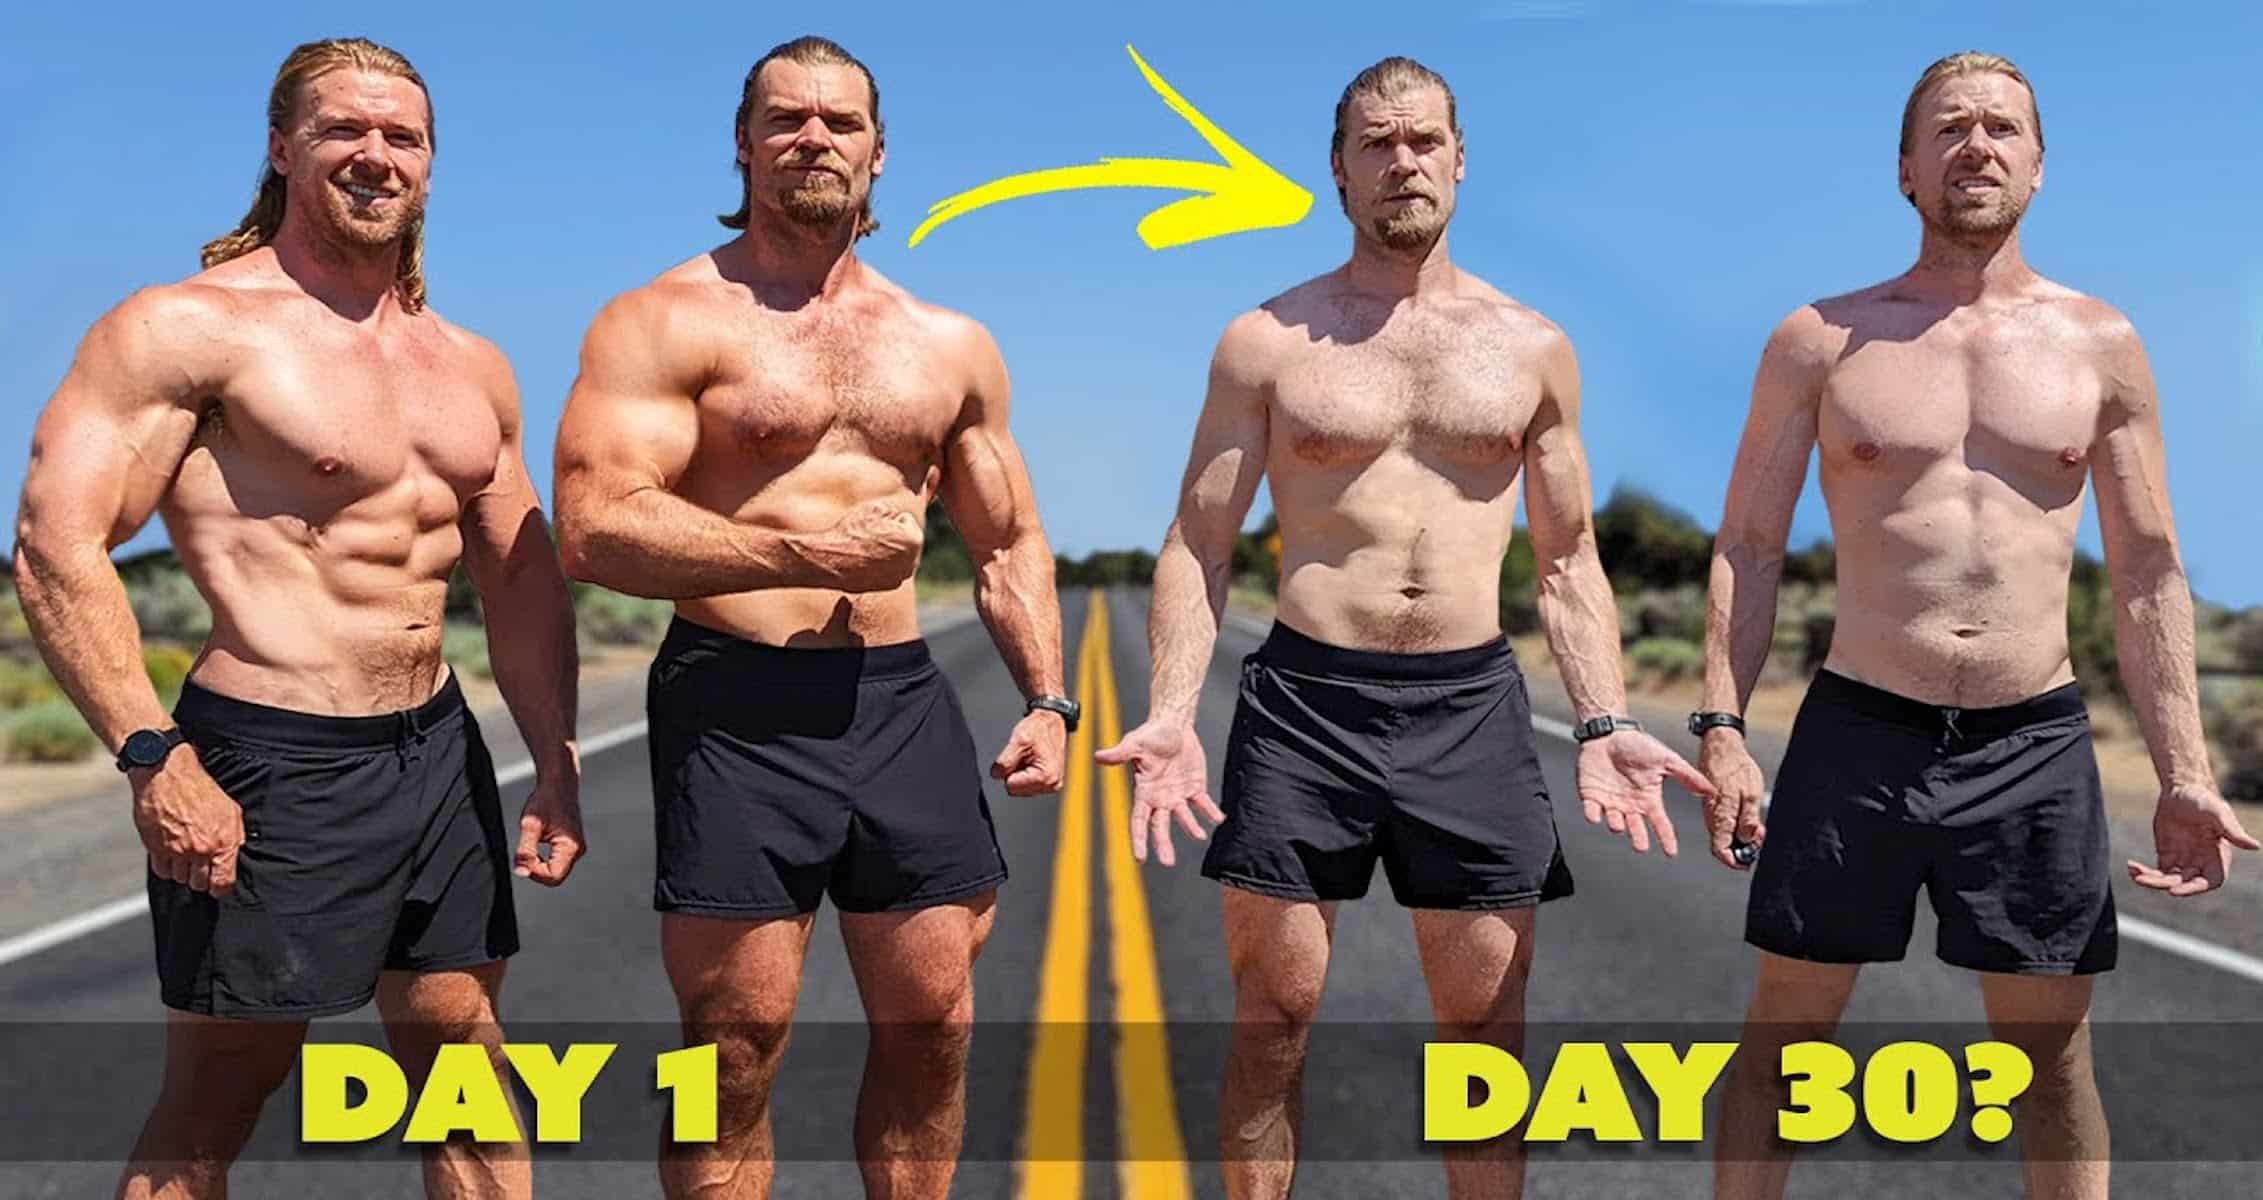 The Buff Dudes are fitness stars who have challenged themselves in differen...